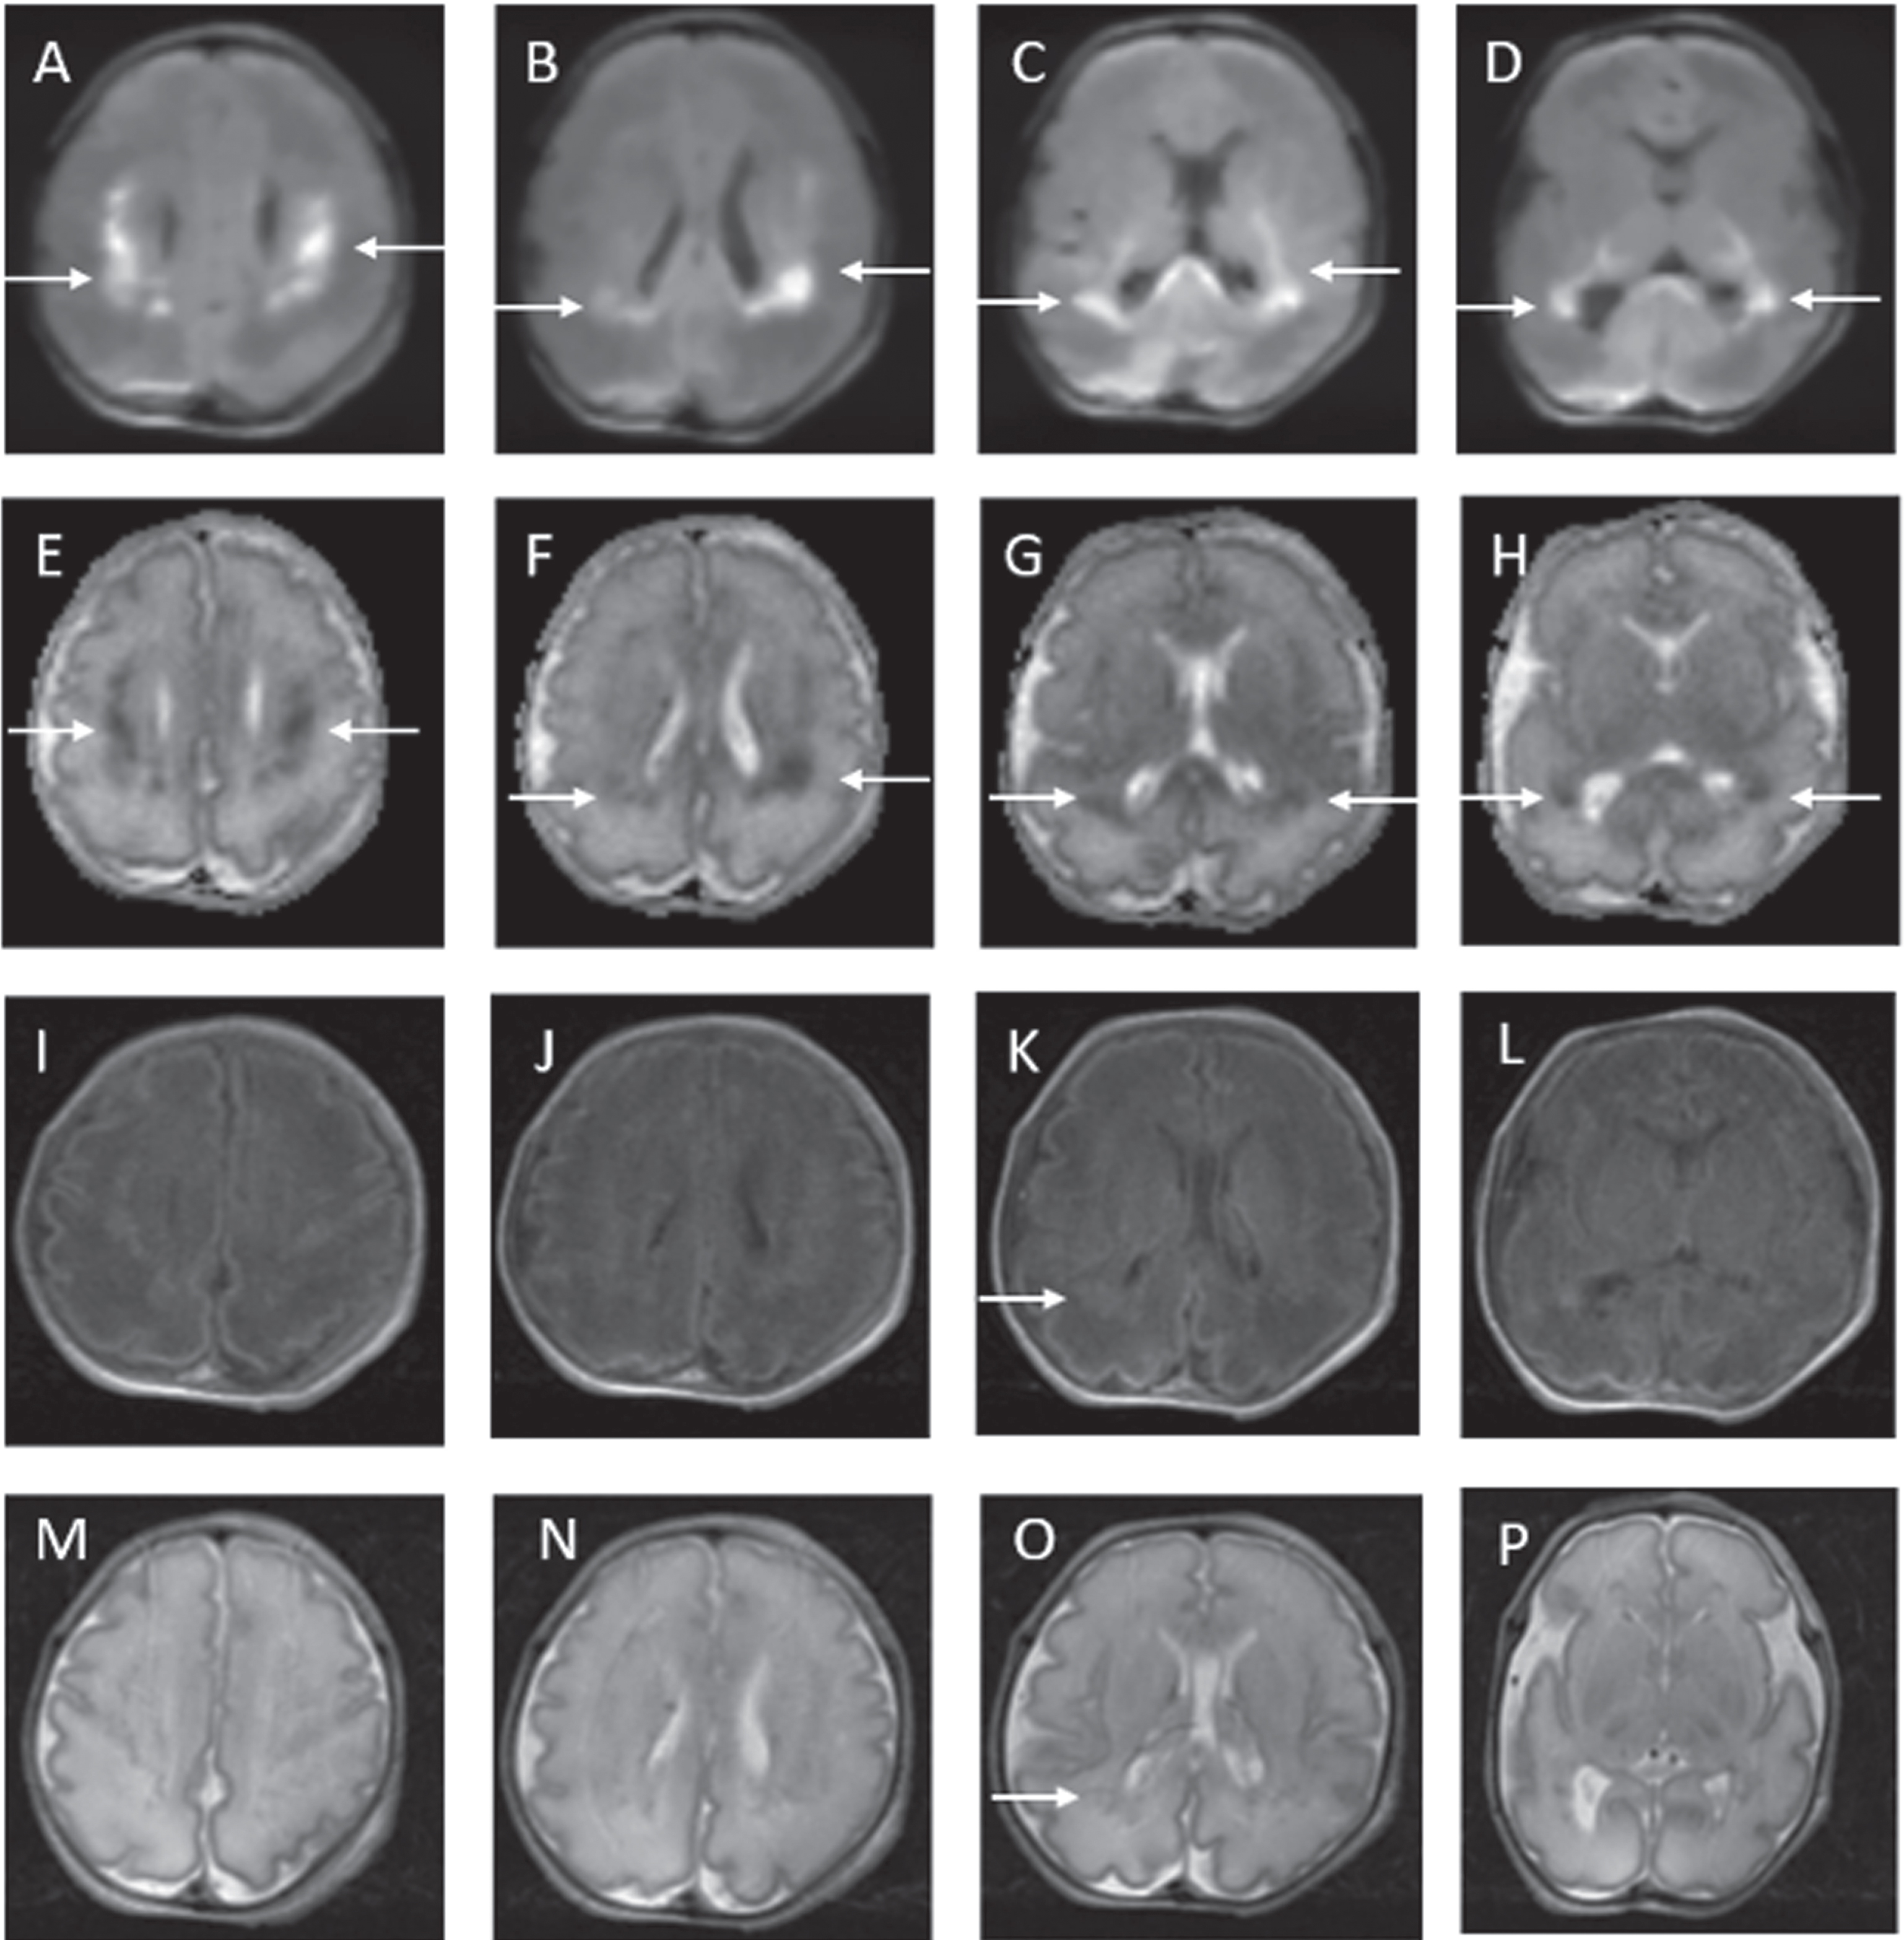 MRI findings on postnatal day 2. DWI abnormalities are depicted from A to D. Apparent diffusion coefficient (ADC) abnormalities are depicted from E to H. White matter abnormalities are in the classic distribution for PVL. Minimal abnormalities seen on conventional axial T1 (I to L) and axial T2 (M to P) weighted images.